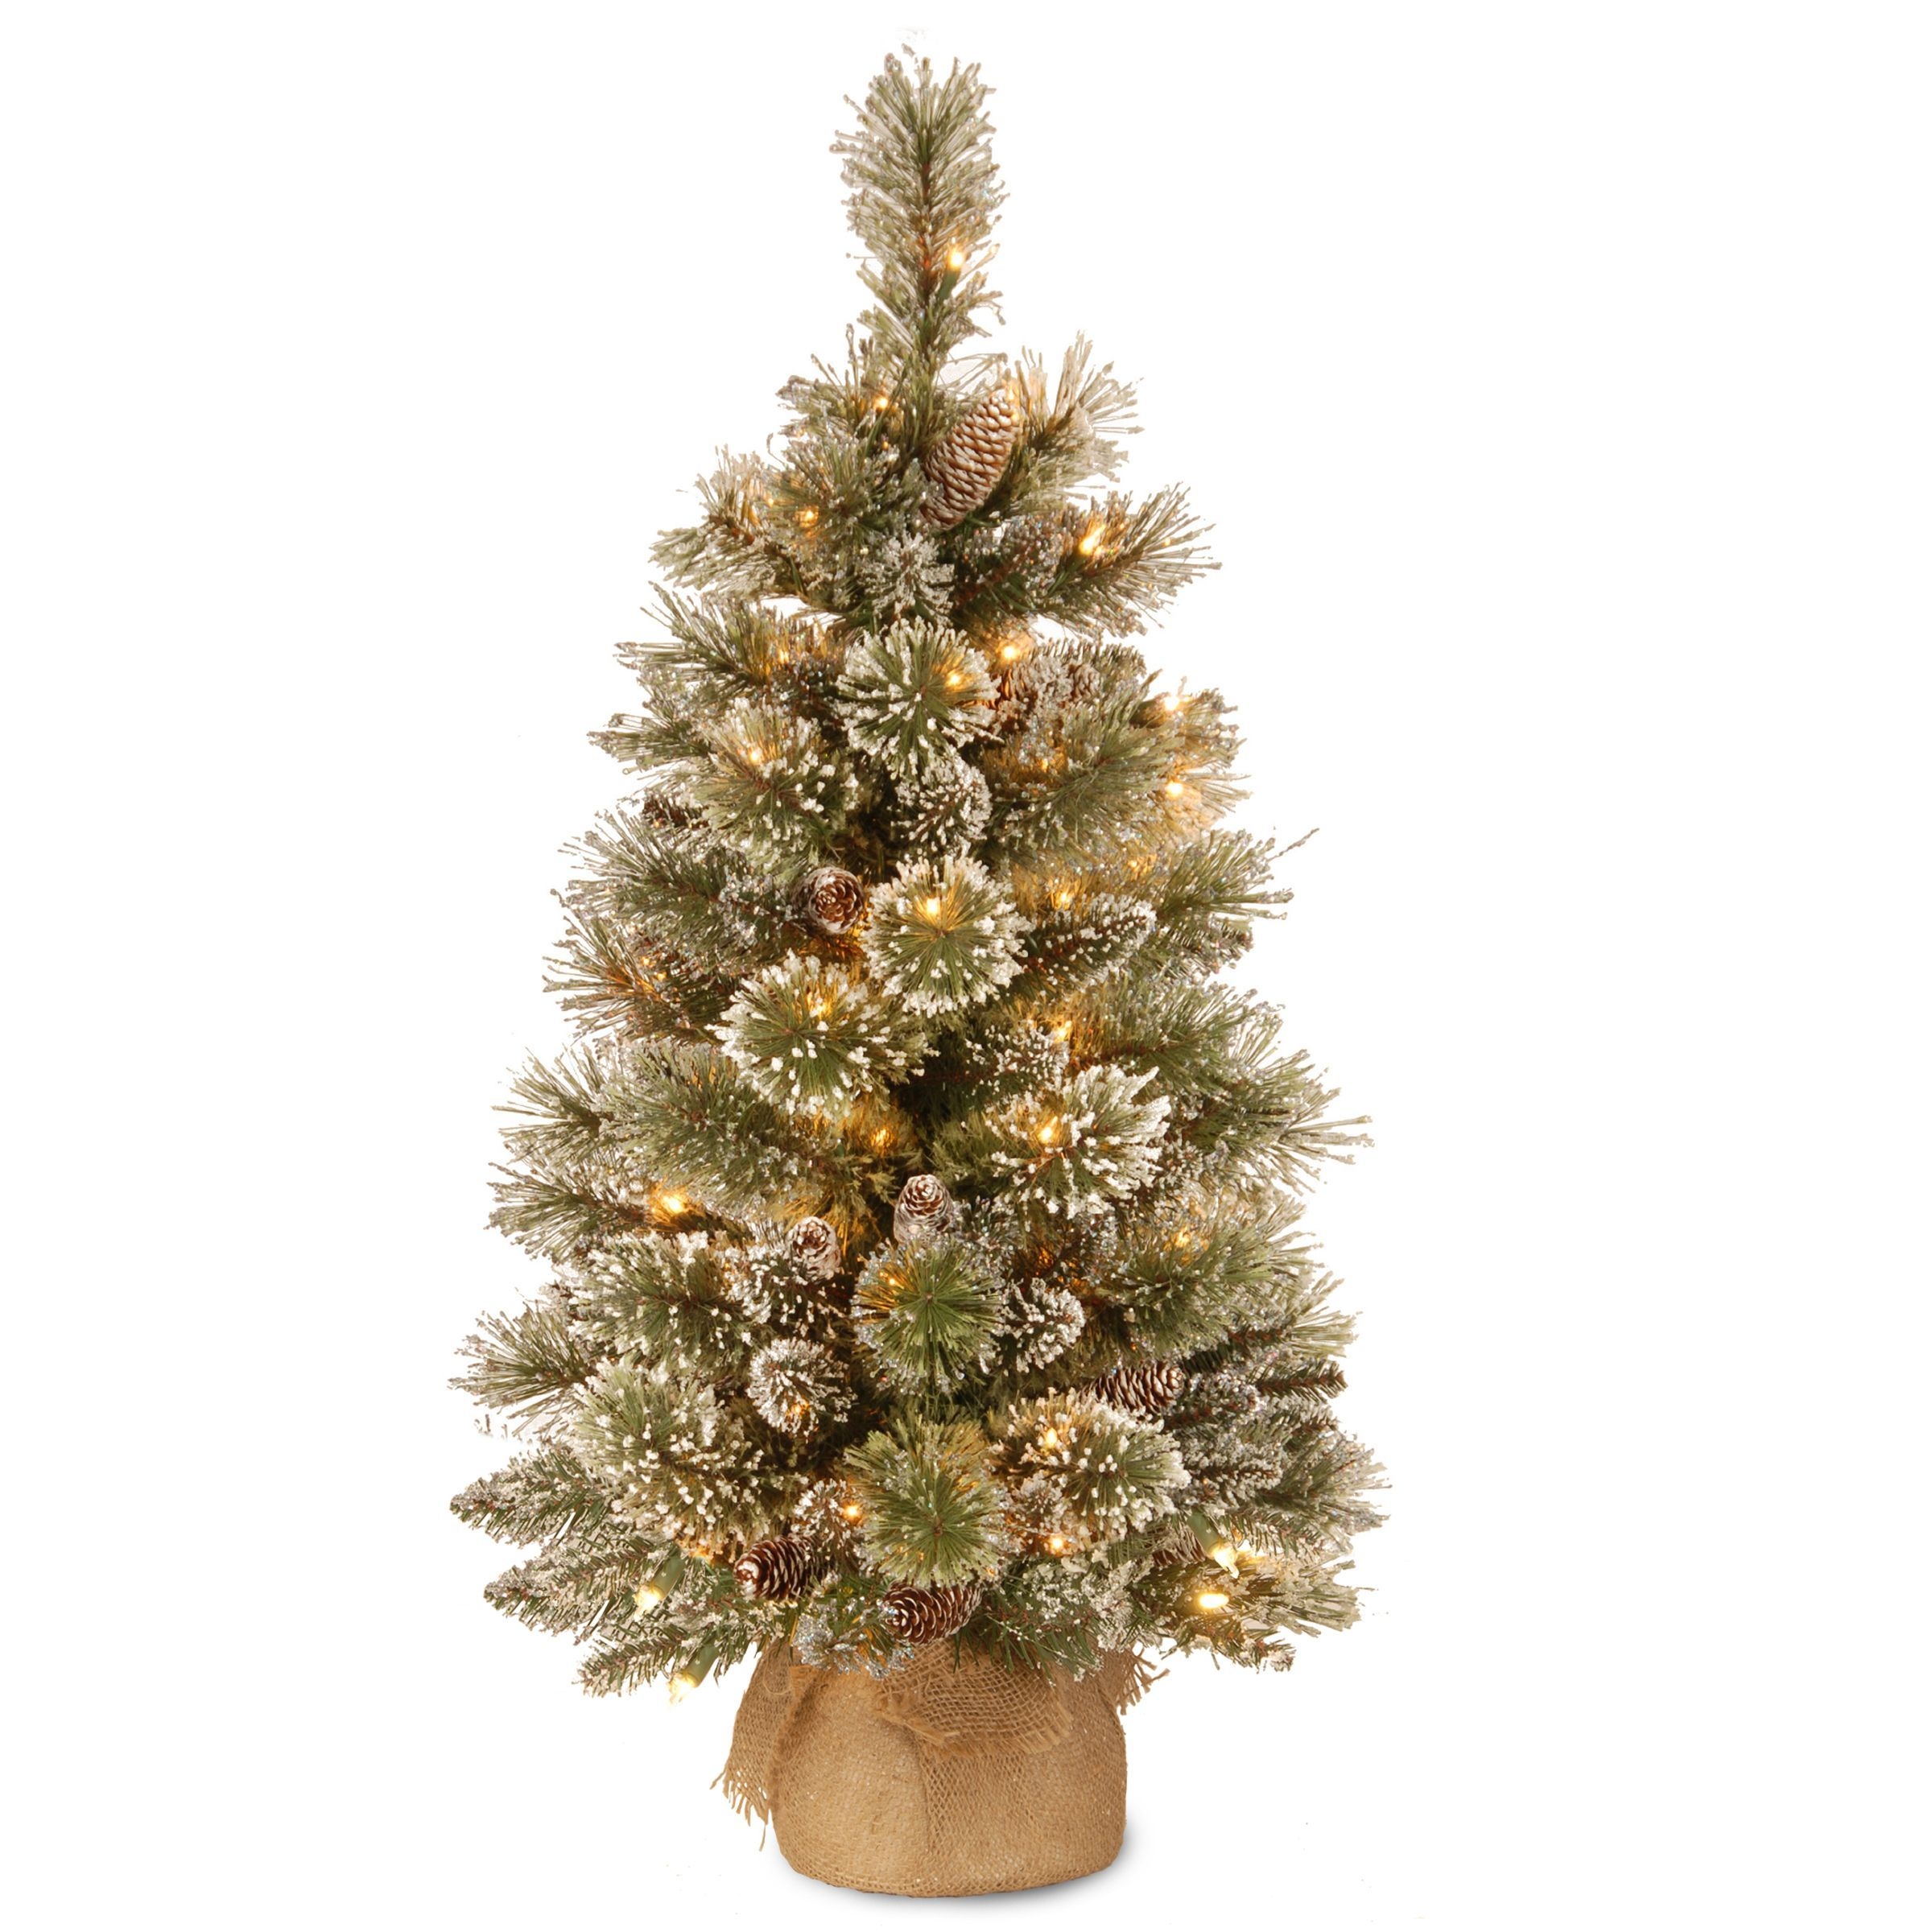 3' Green Pine Artificial Christmas Tree with 35 Clear/White Incandescent Lights